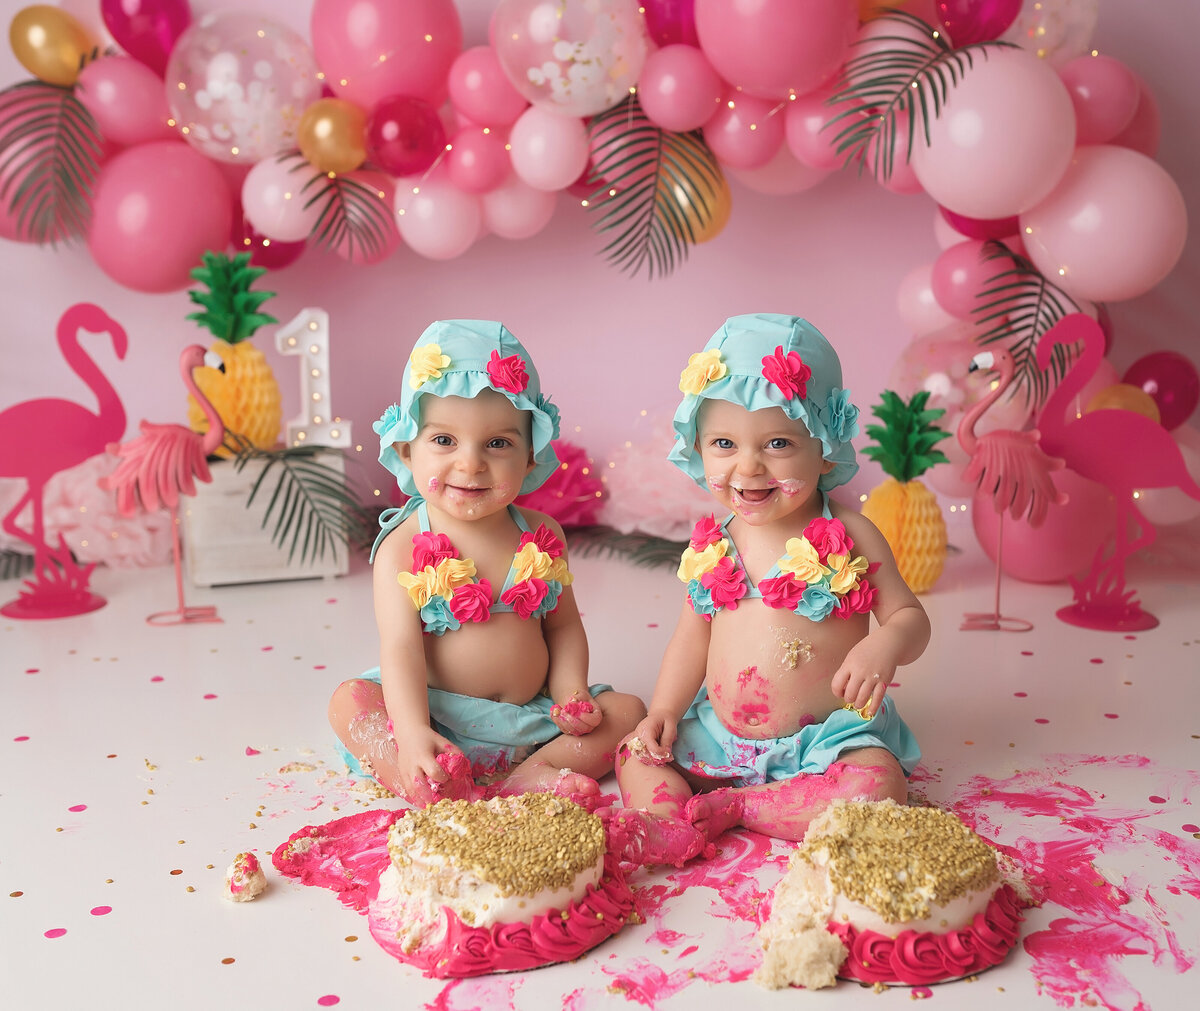 Hawaiian flamingo themed cake smash in West Palm Beach photography studio. Twin baby girls are in pink, yellow, and teal floral bikini tops with matching hats and teal skirts. They are smiling at the camera with the cakes smashed in front of them. In the background, there is a balloon arch with various shades of pink and interwoven leaves, pineapples, and flamingos.